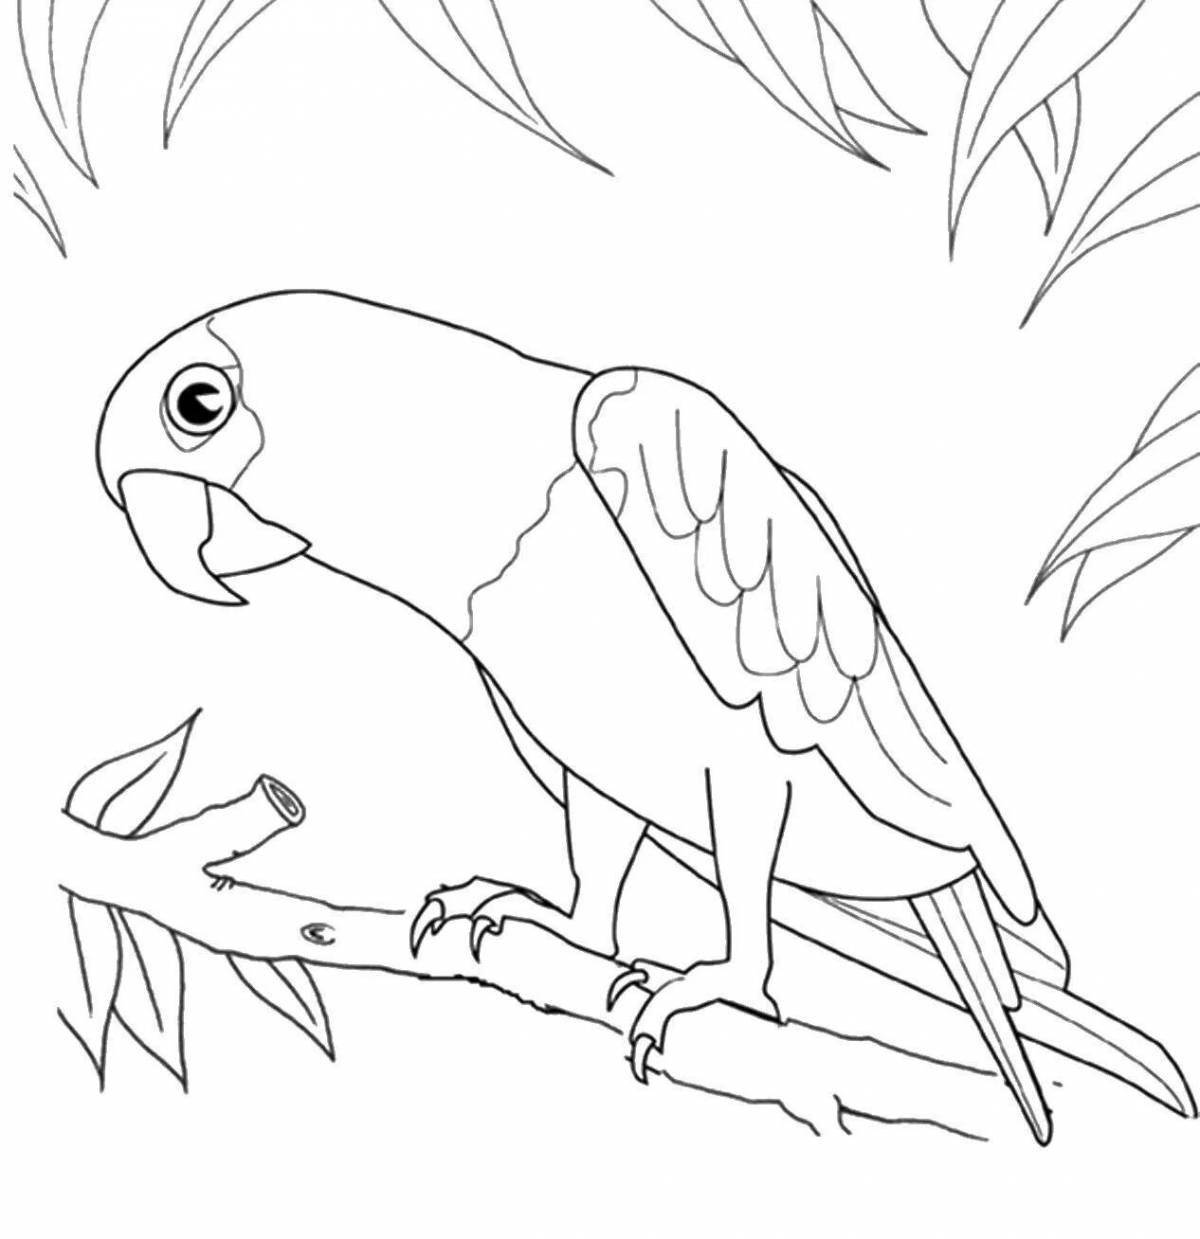 Fancy animal and bird coloring pages